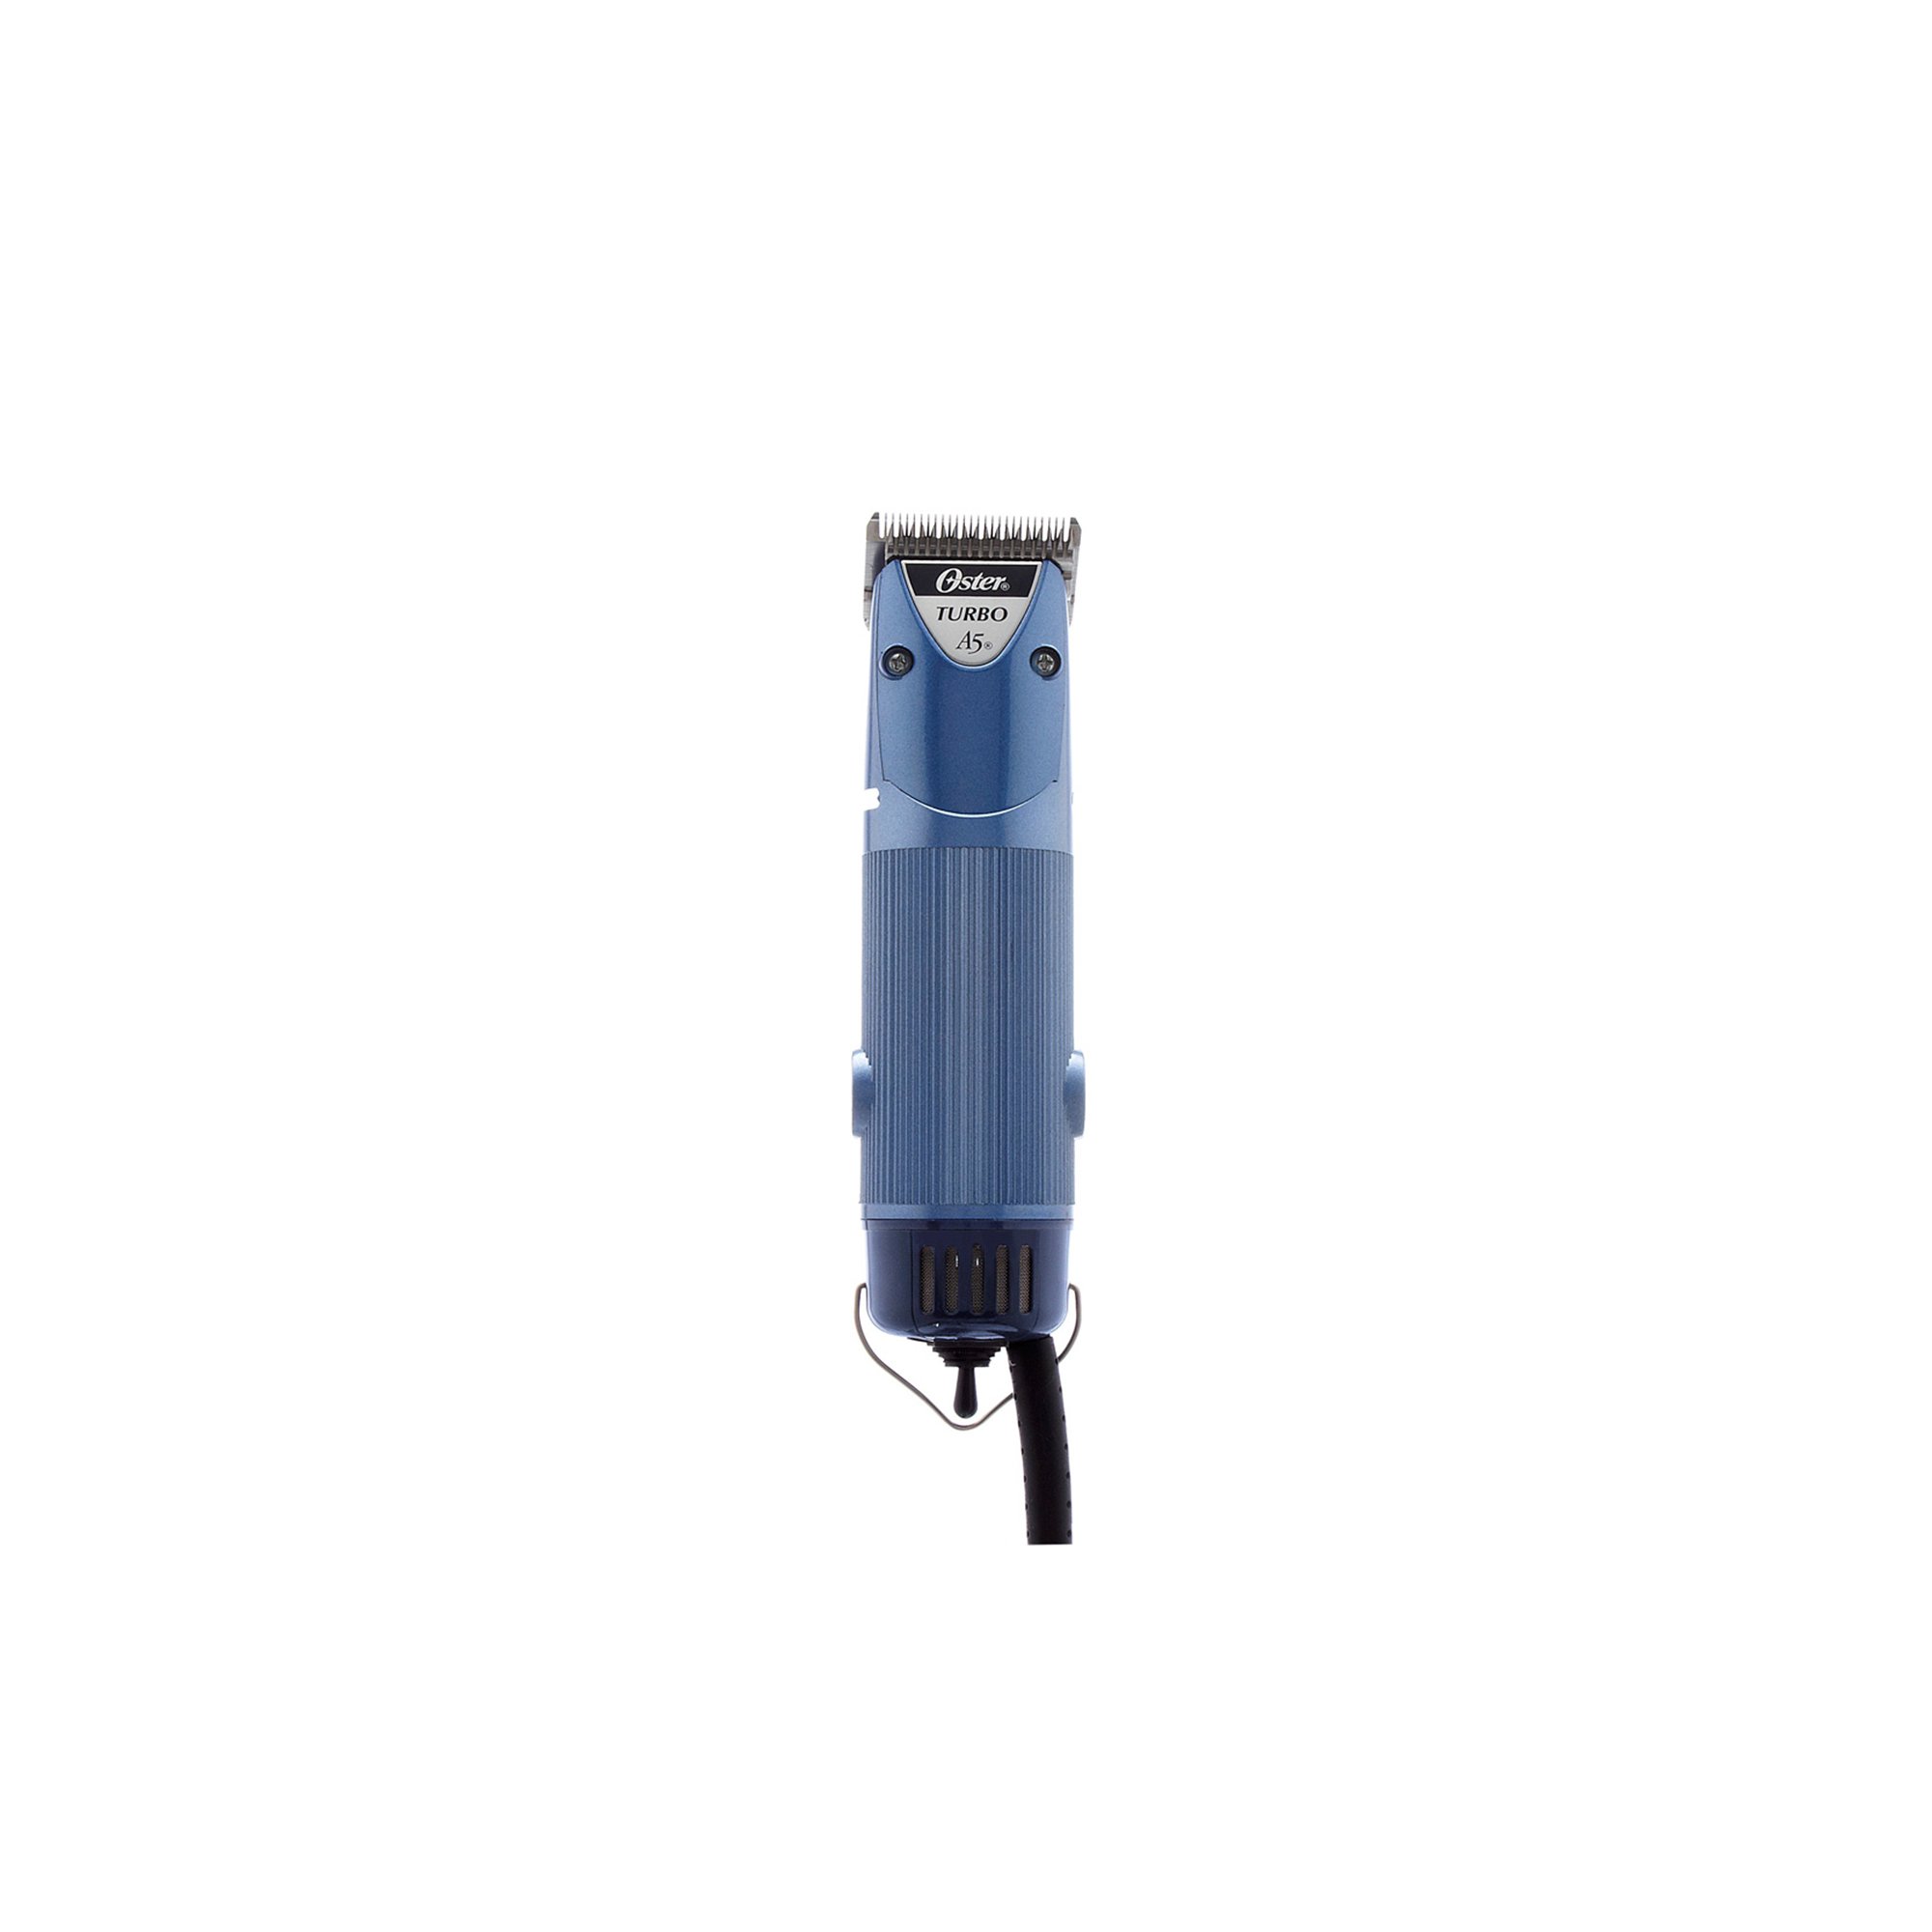 Oster® Turbo A5® 2-Speed Clipper | Oster Pro